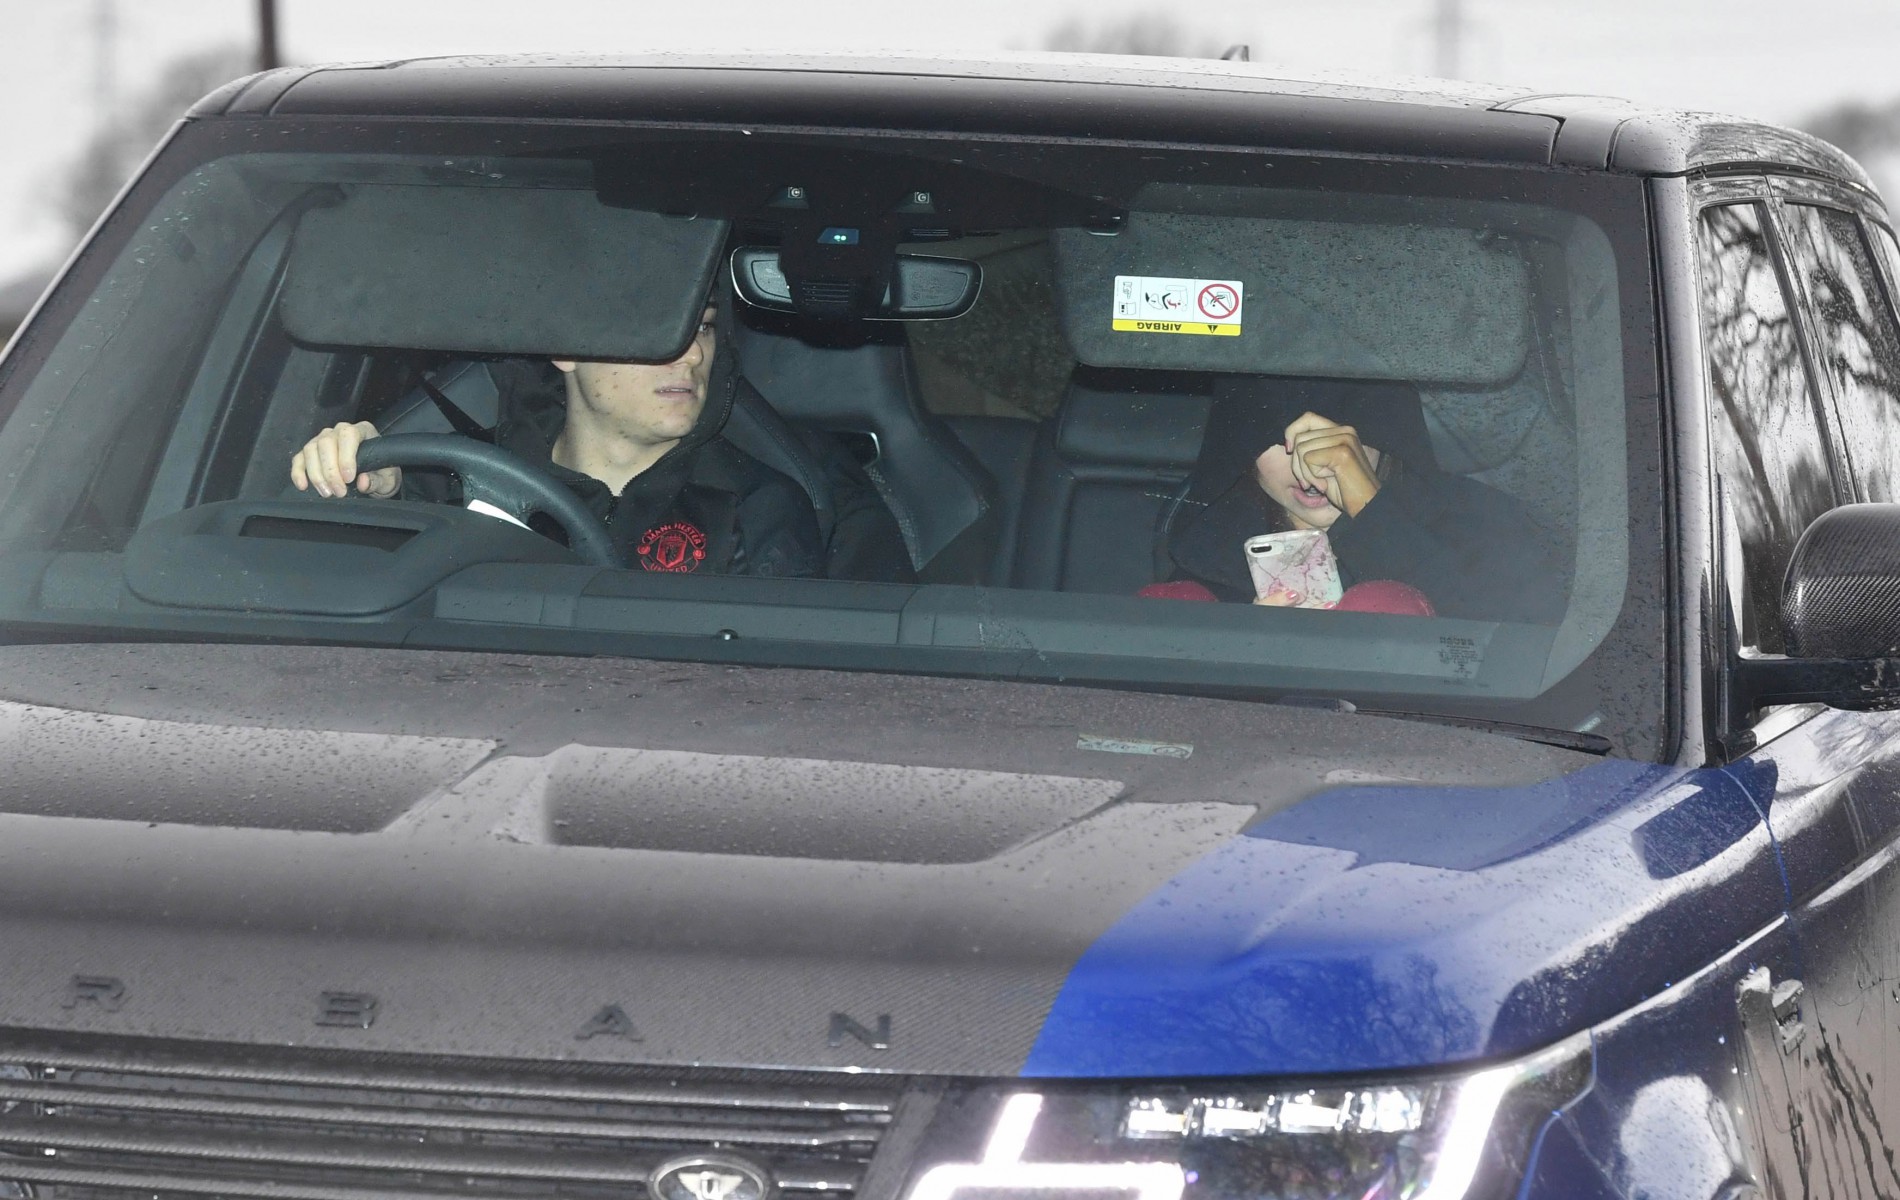 Daniel James and girlfriend Ria Hughes arrived at the training ground together